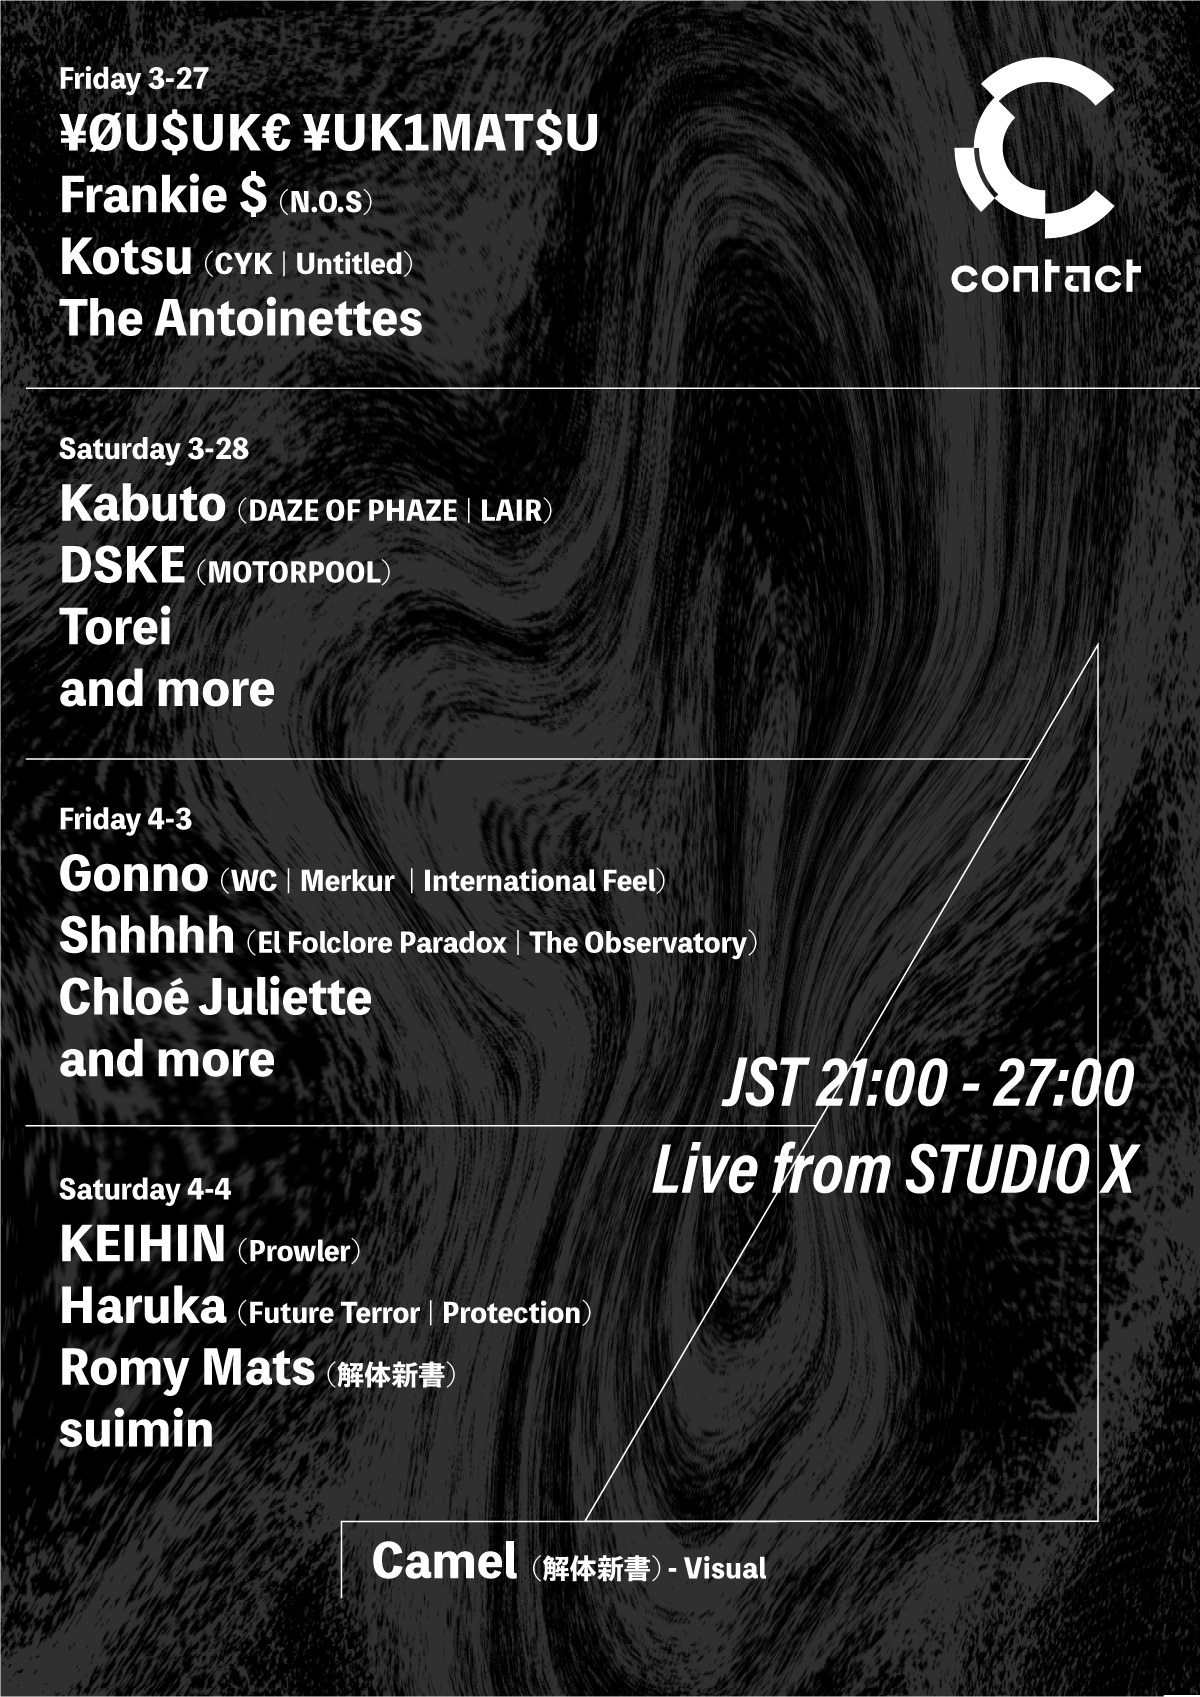 Live from Studio X Contact Tokyo